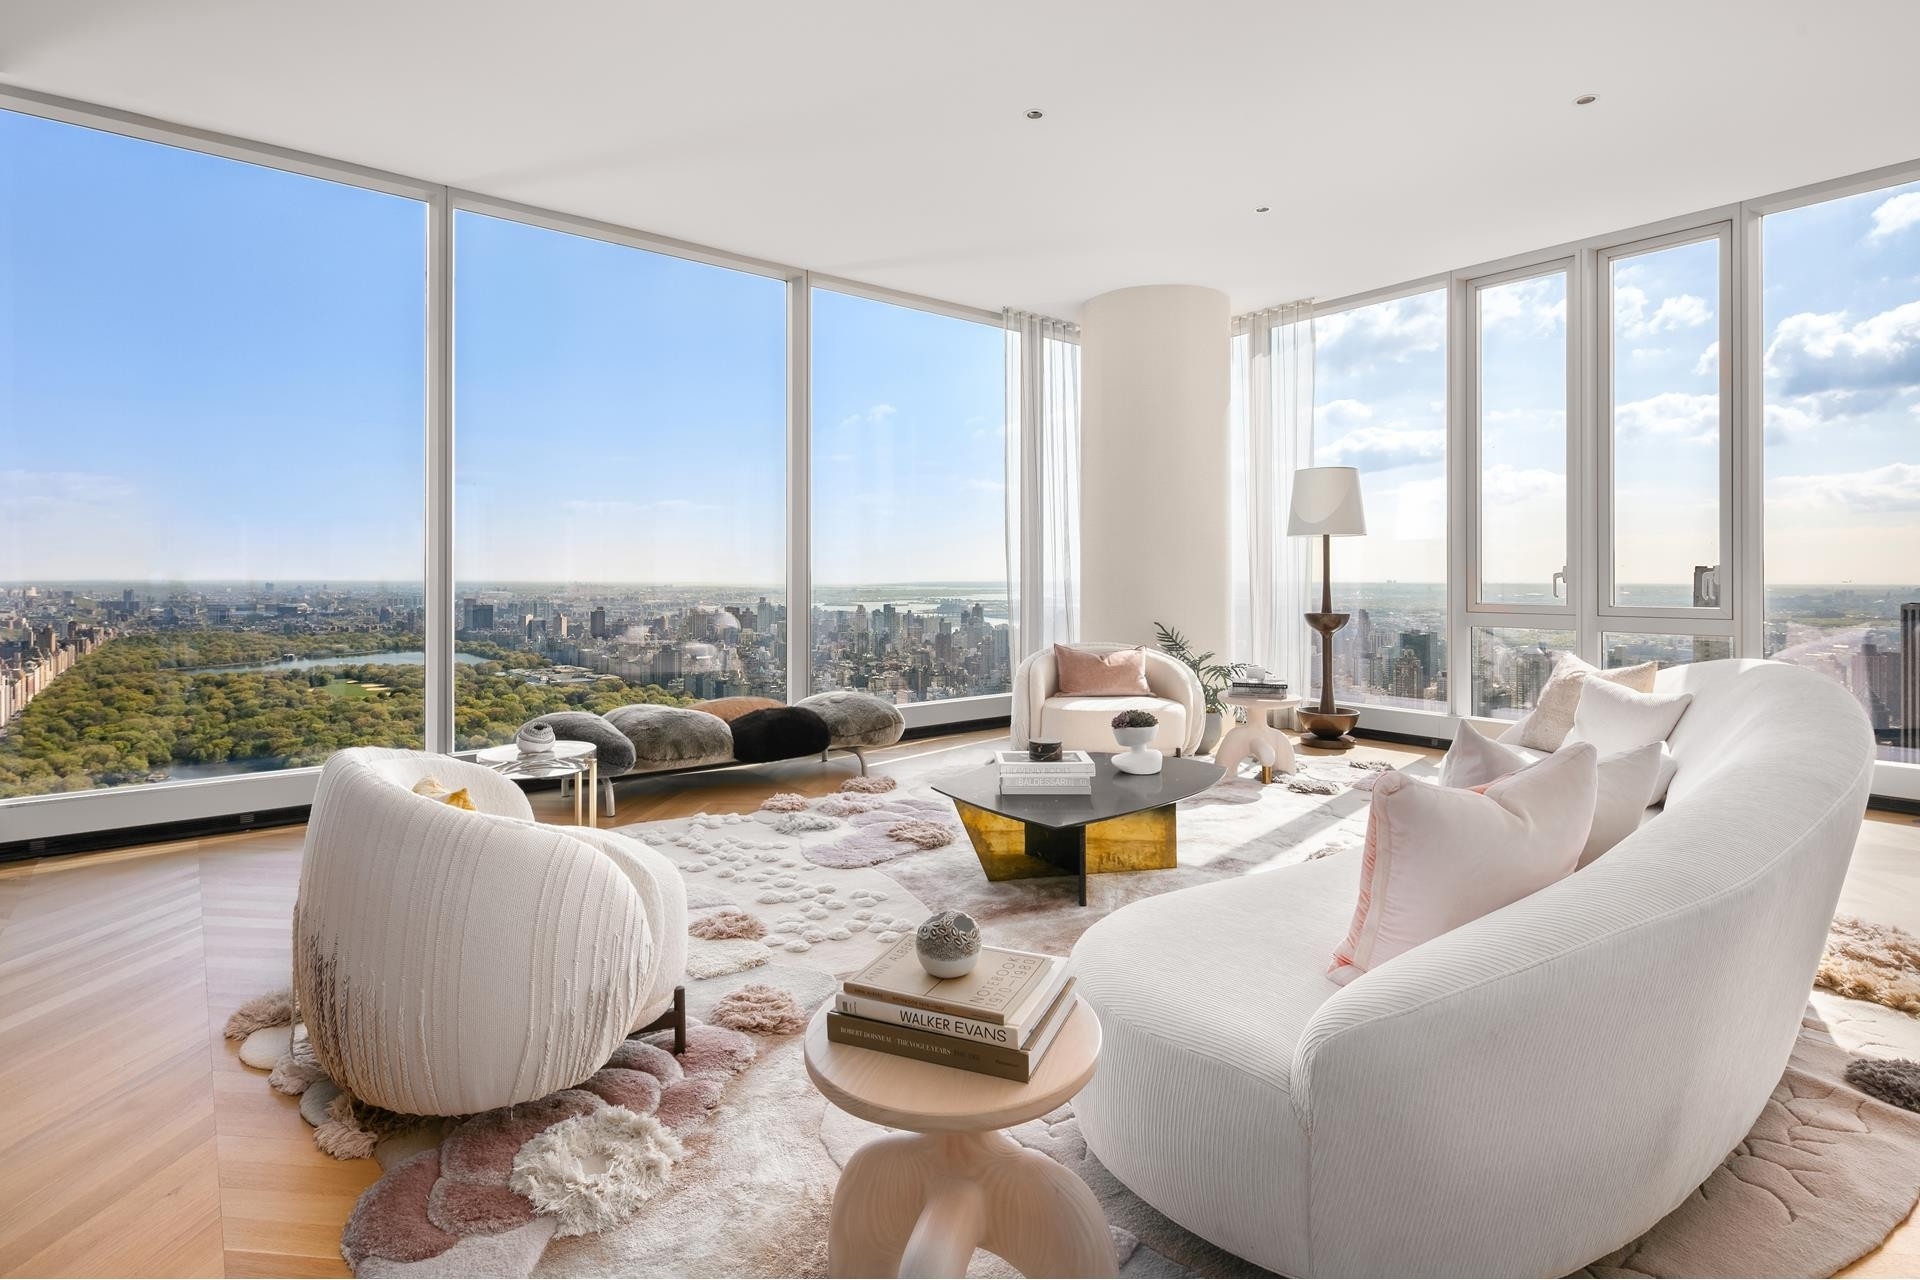 Condominium for Sale at Central Park Tower, 217 W 57TH ST, 69E Midtown West, New York, NY 10019